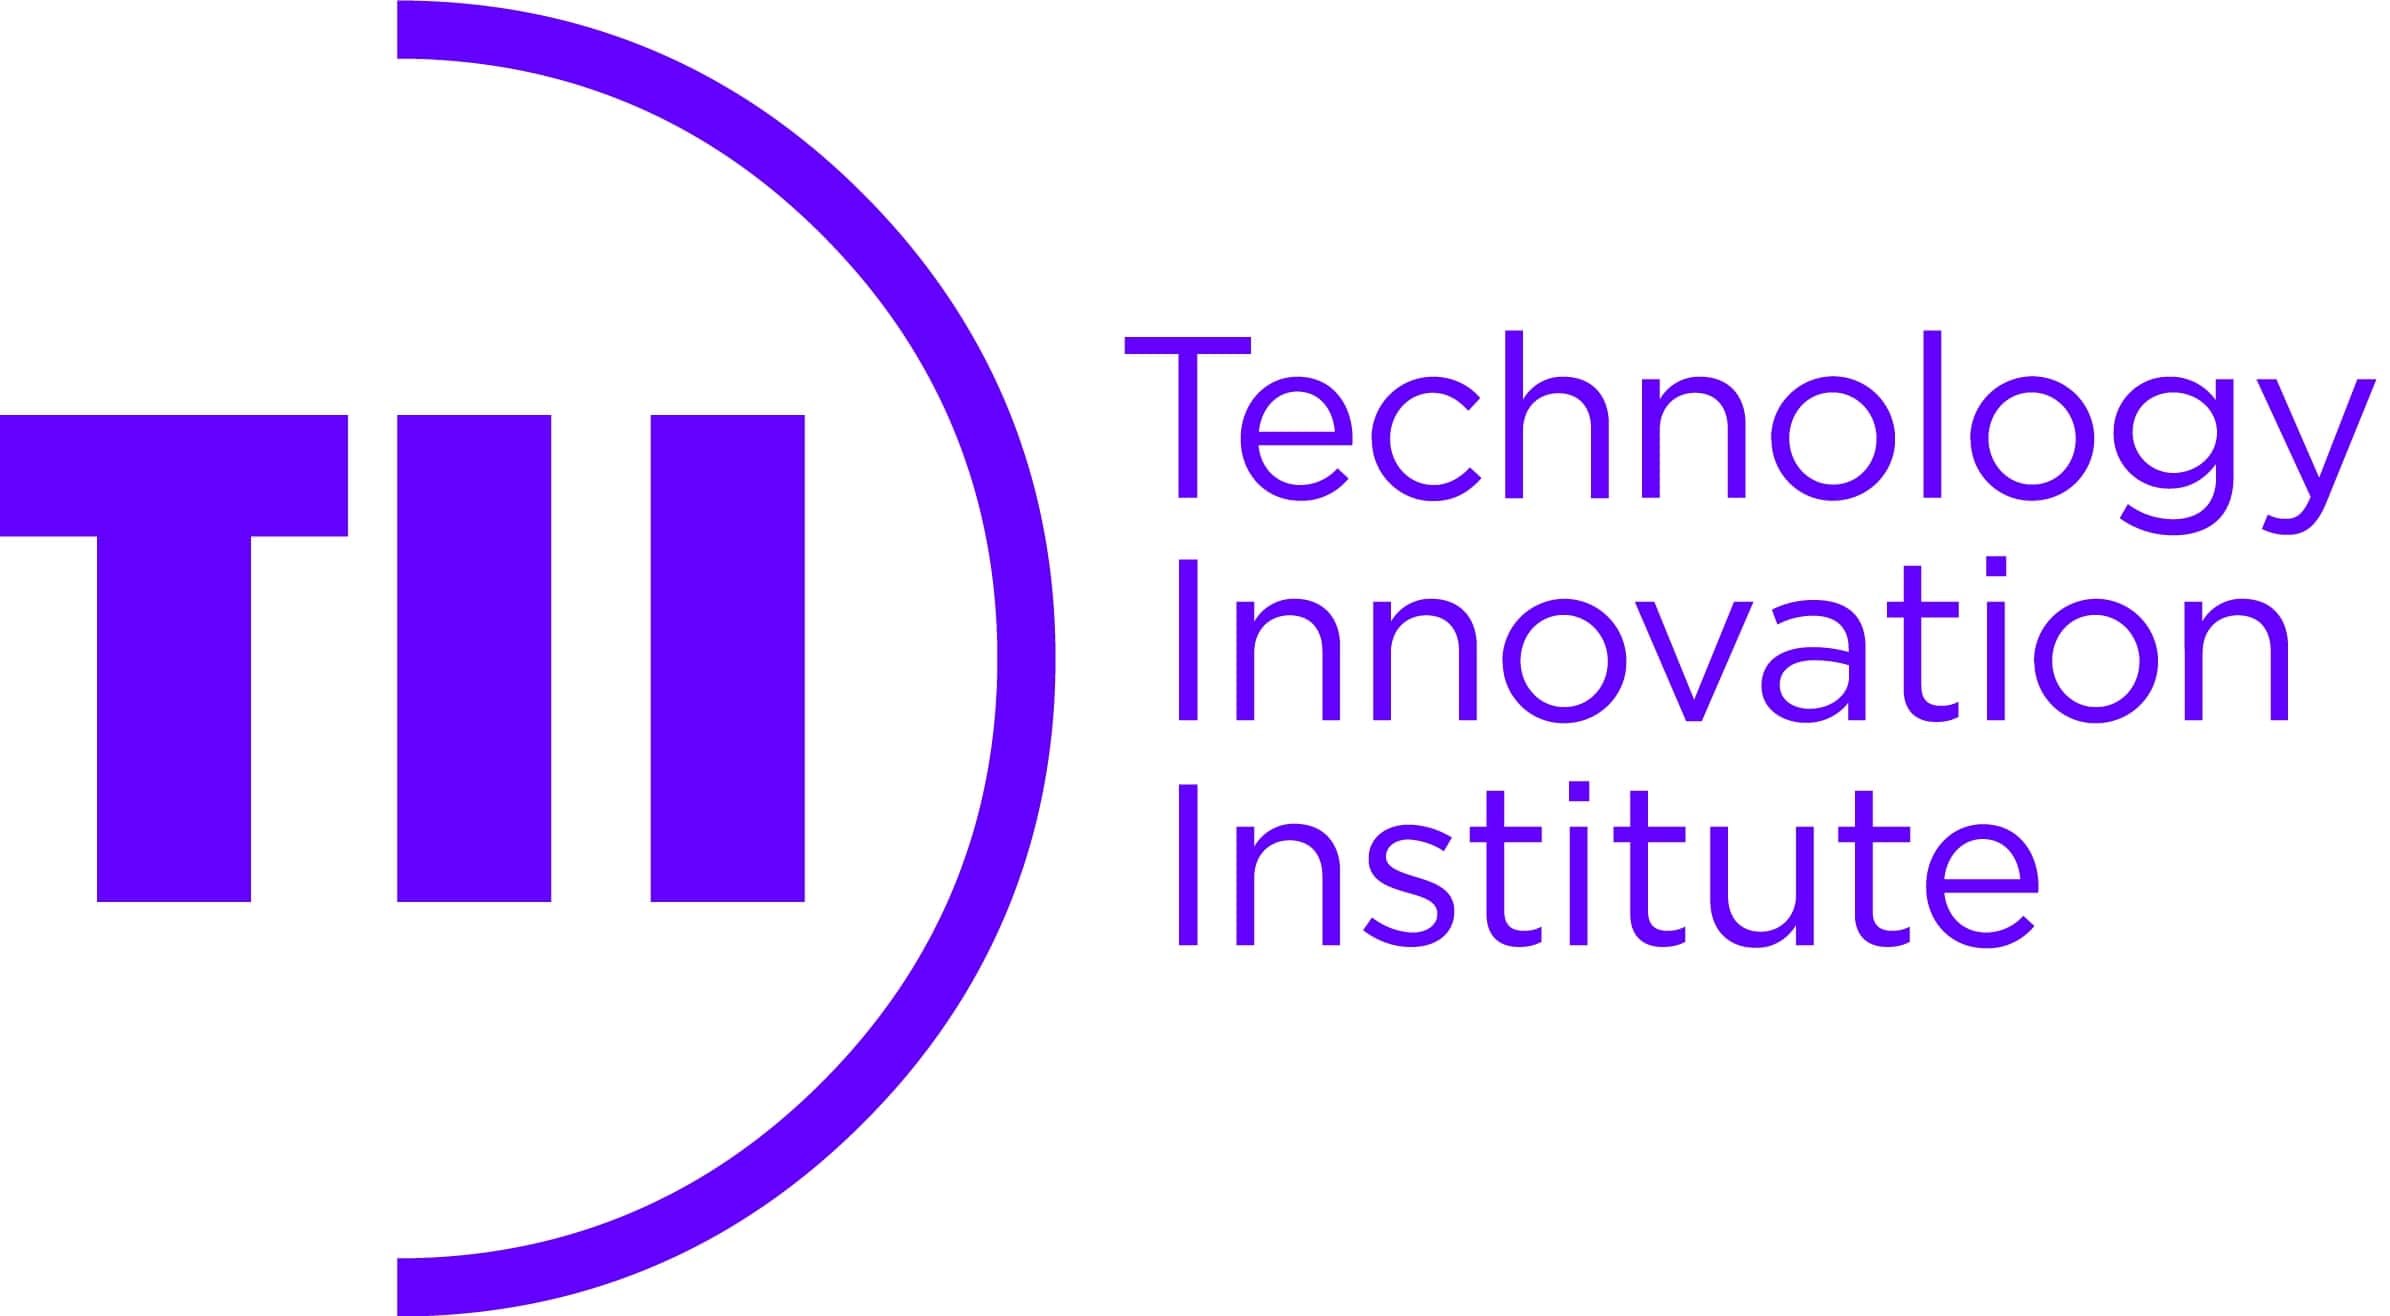 Technical Innovation Institute